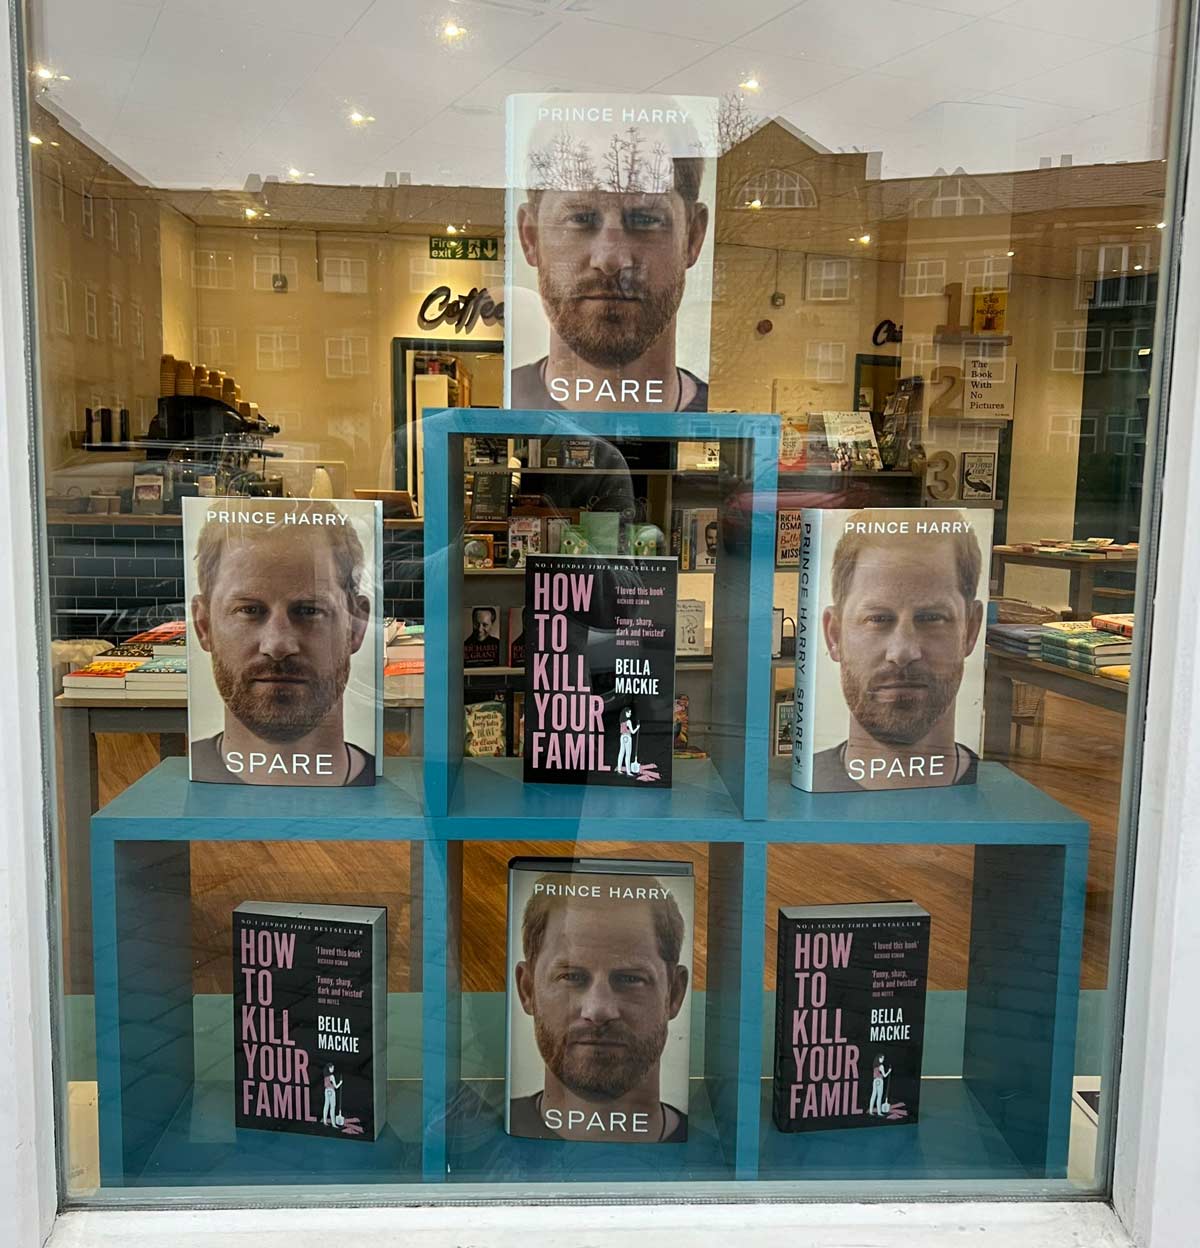 Great to see Prince Harry's new book on display